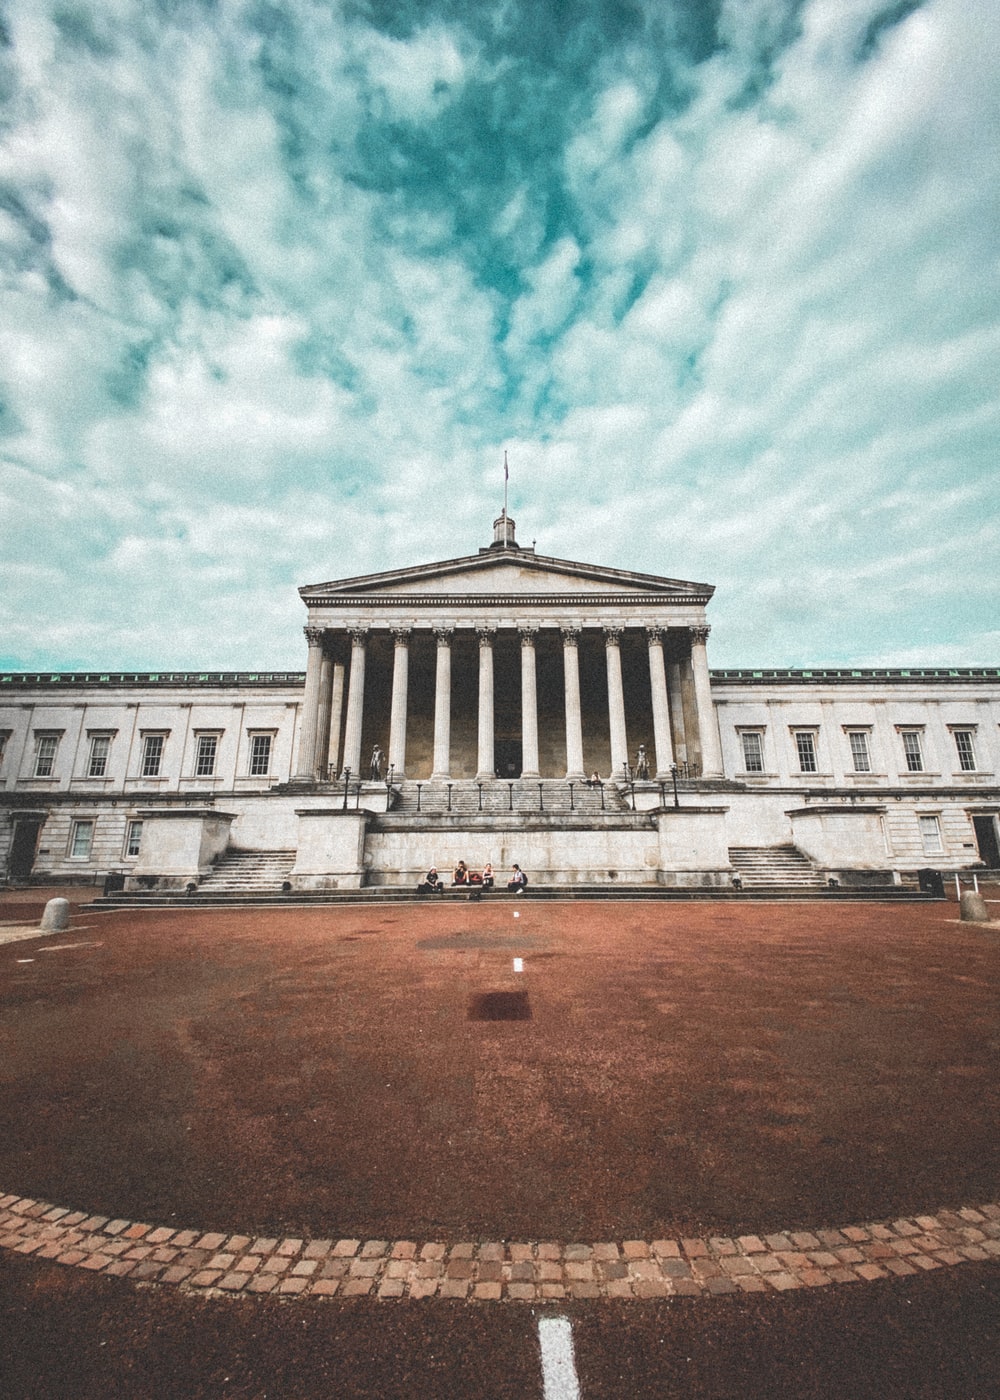 University College London Pictures Download Images on Unsplash 1000x1400